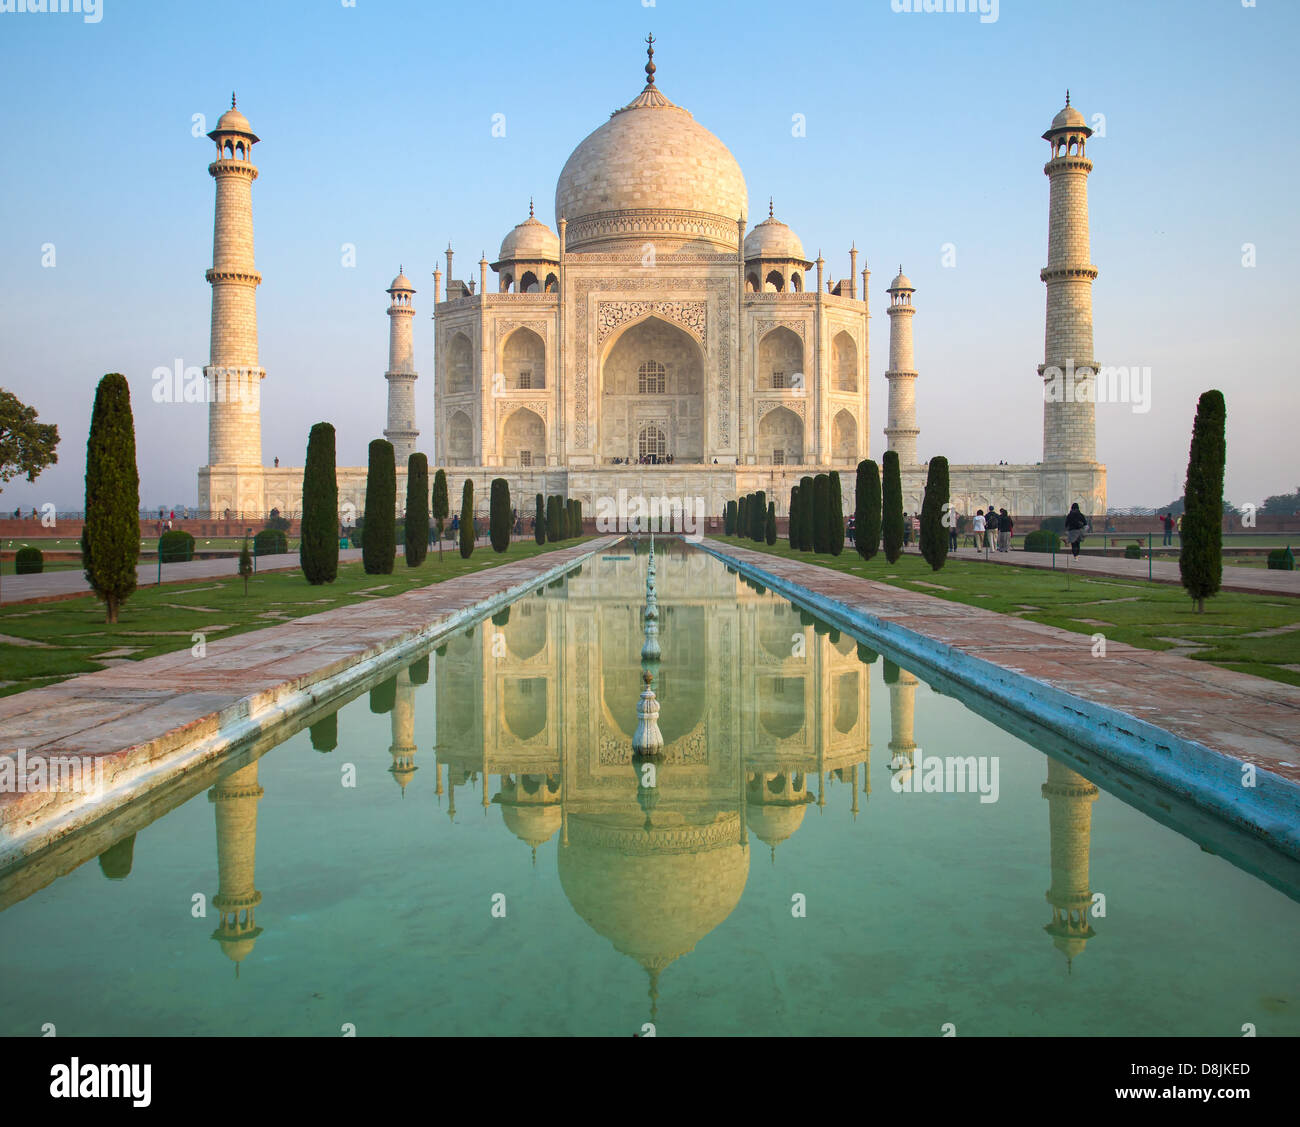 A perspective view on Taj Mahal mausoleum with reflection in water. Agra, India. Stock Photo